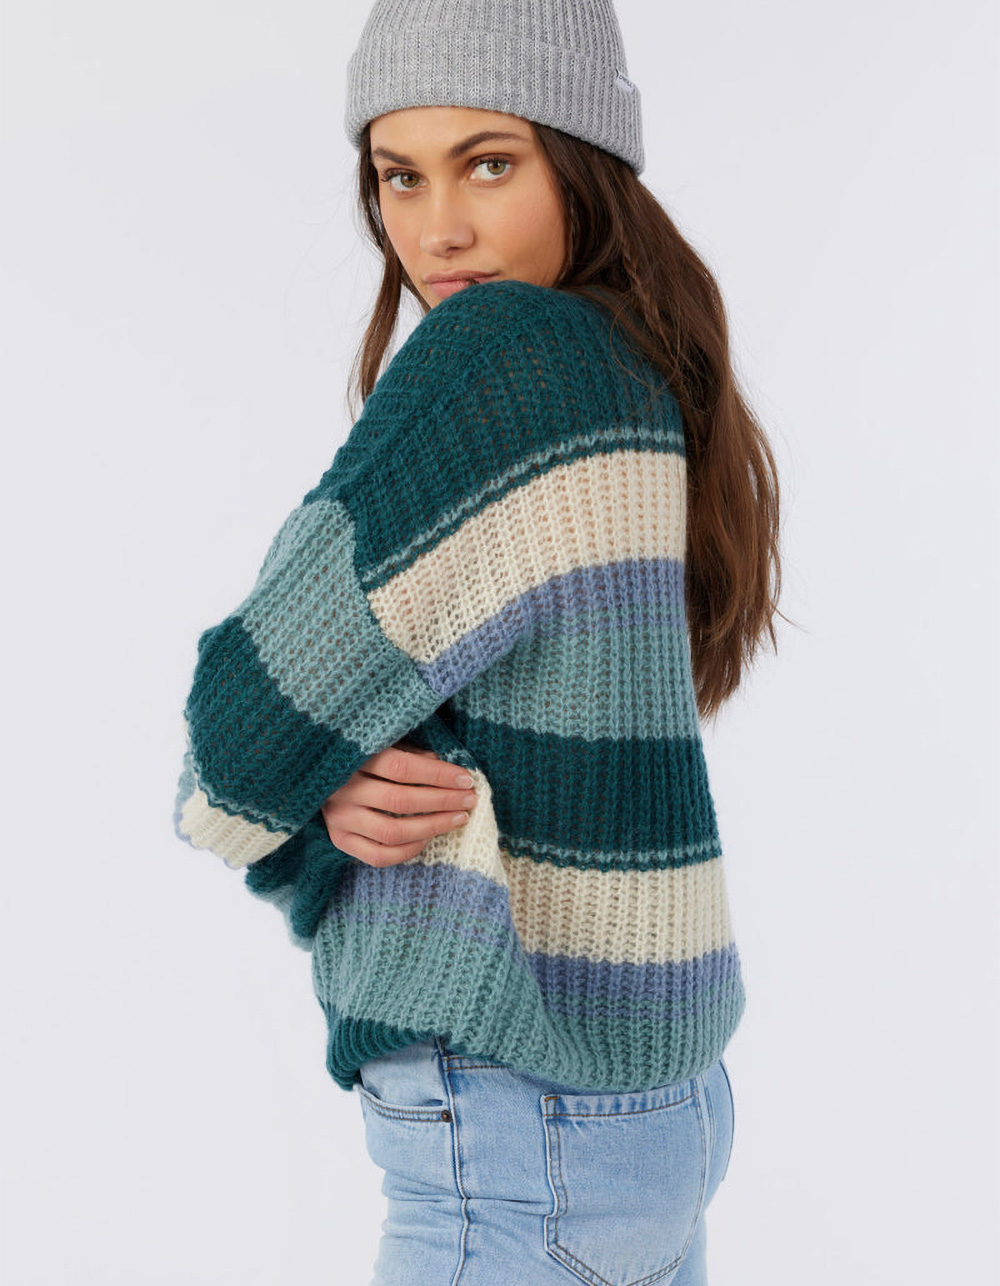 O'NEILL Lake View Womens Oversized Sweater - BLUE COMBO | Tillys